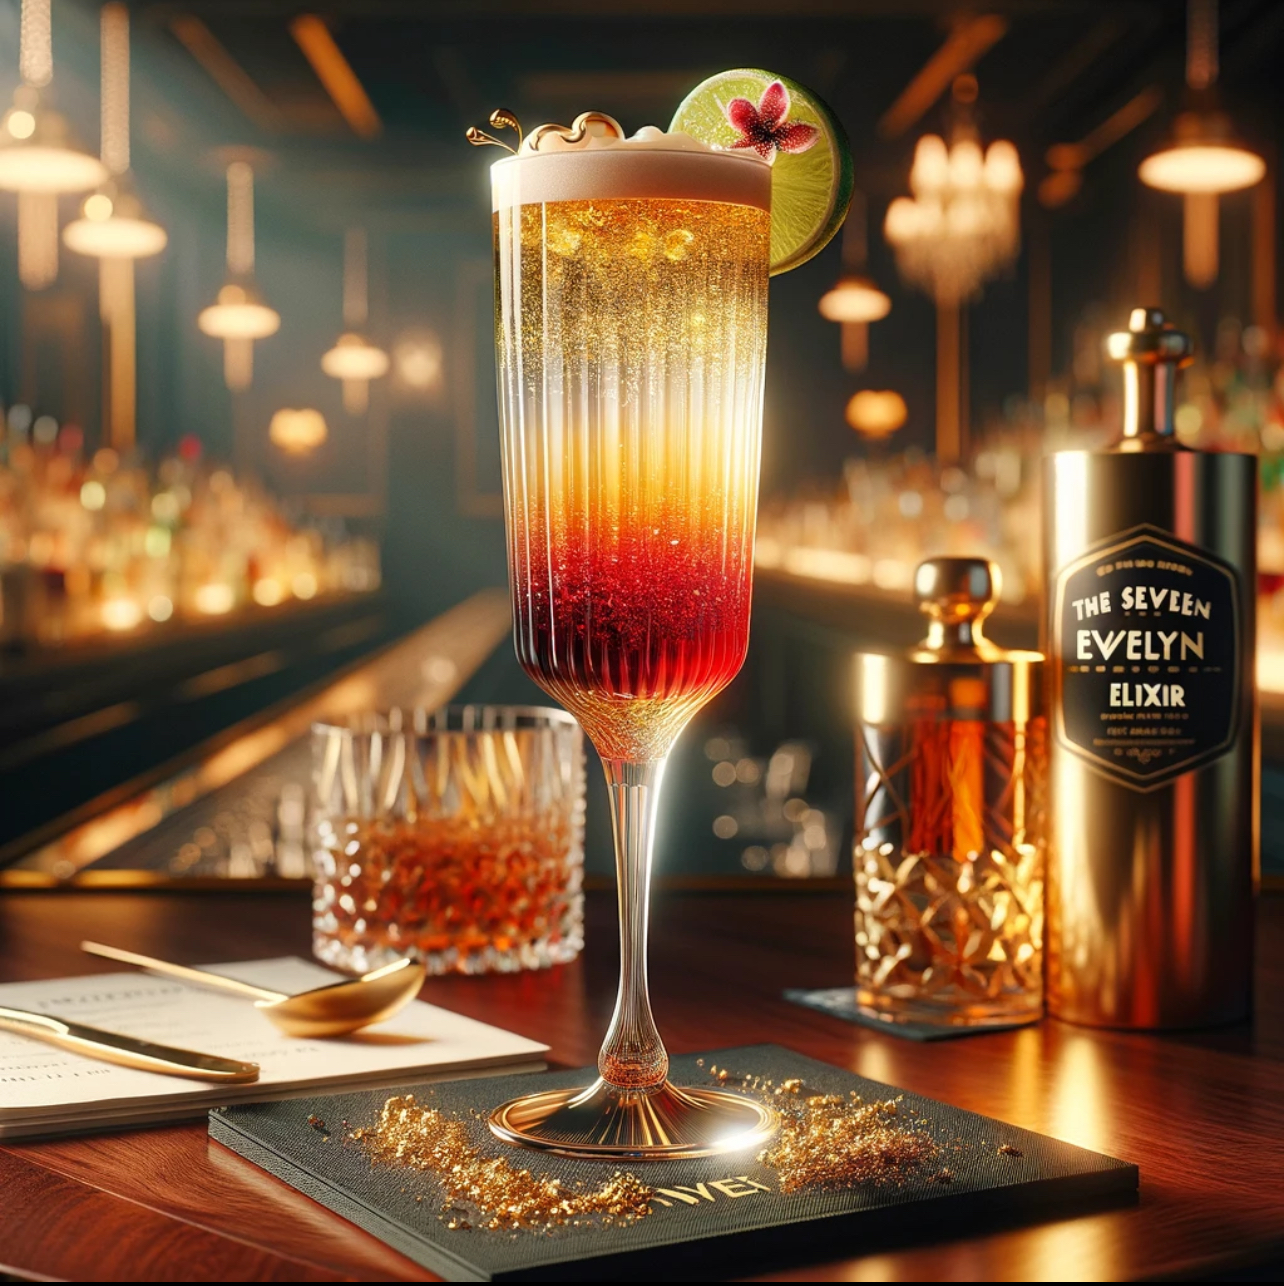 The Evelyn Elixir Cocktail